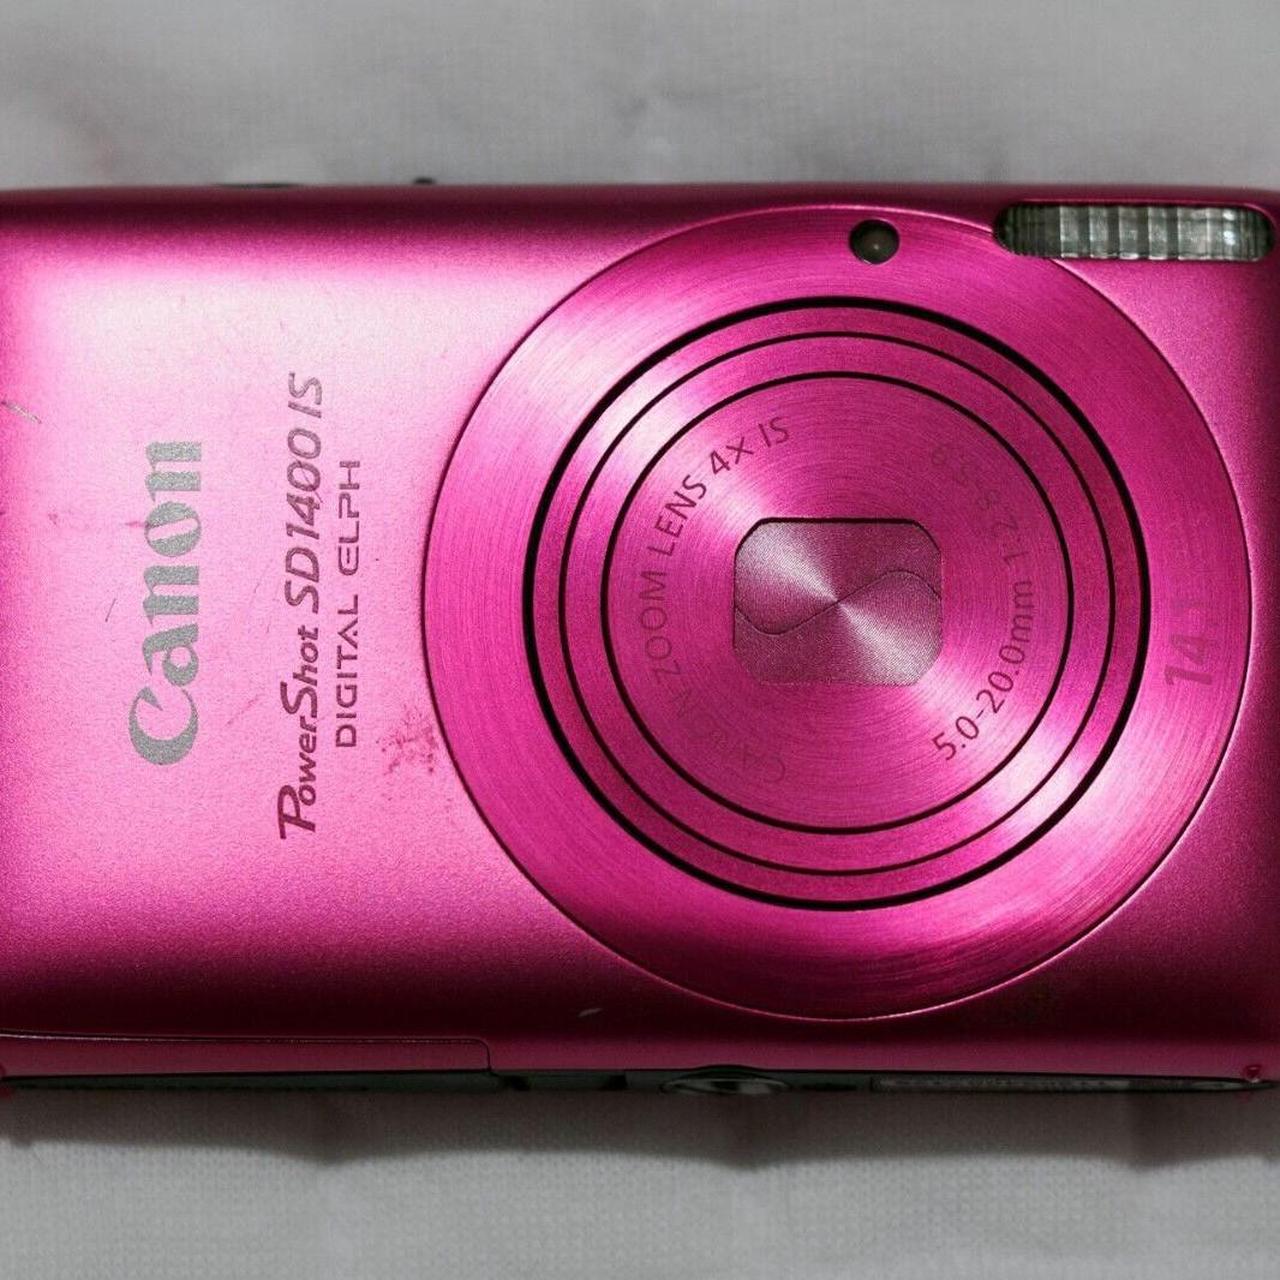 Canon PowerShot SD1400 IS 14.1 MP Camera is in... - Depop